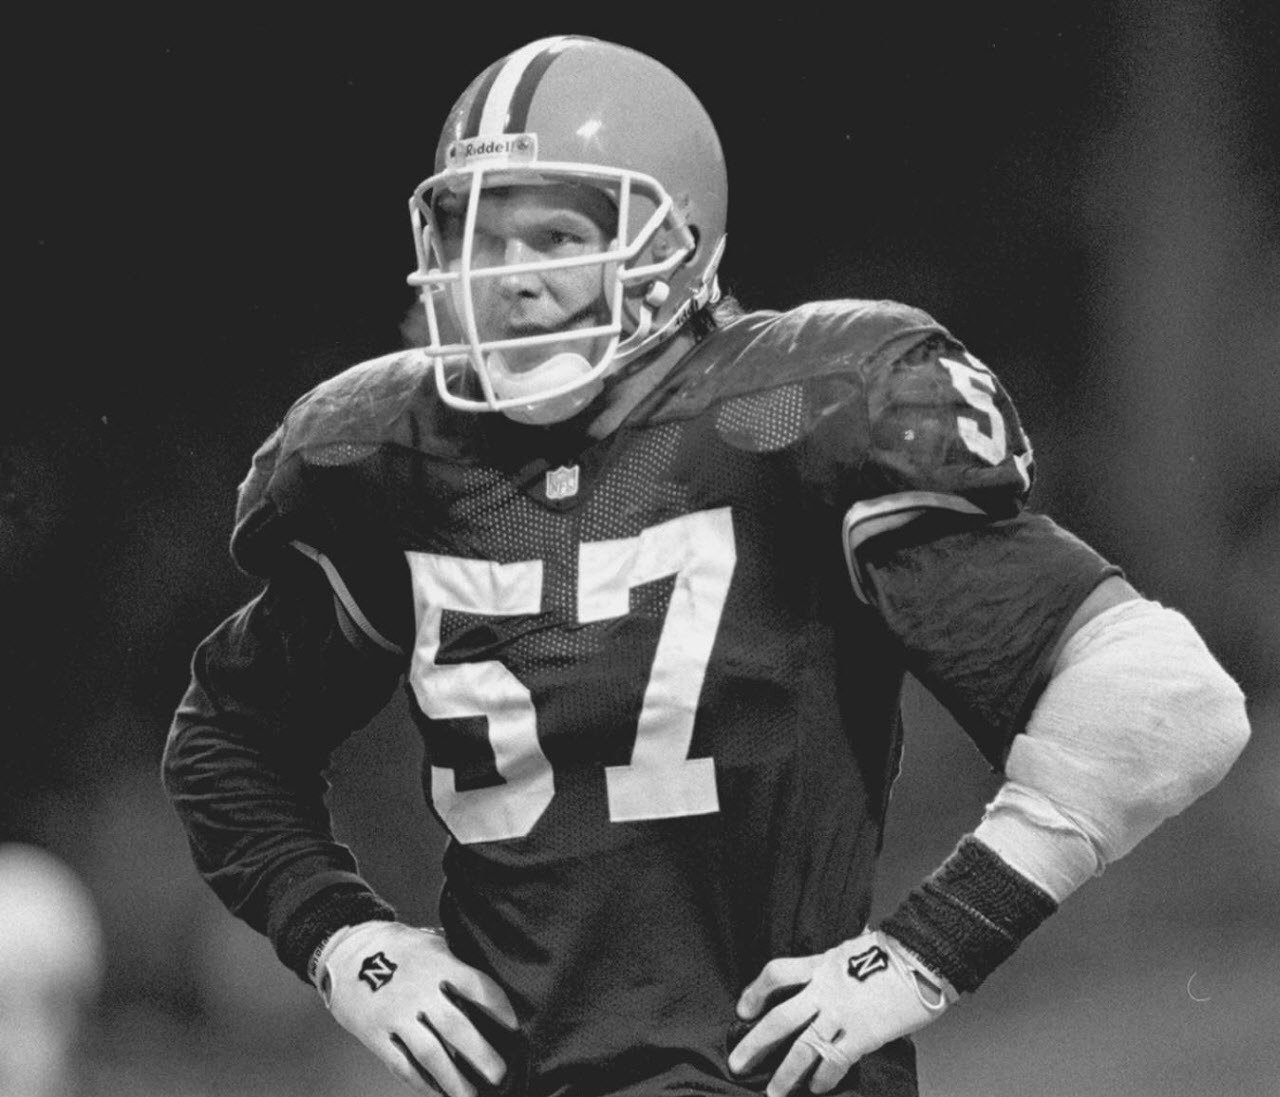 Clay Matthews hopes his dad takes another step toward Hall of Fame